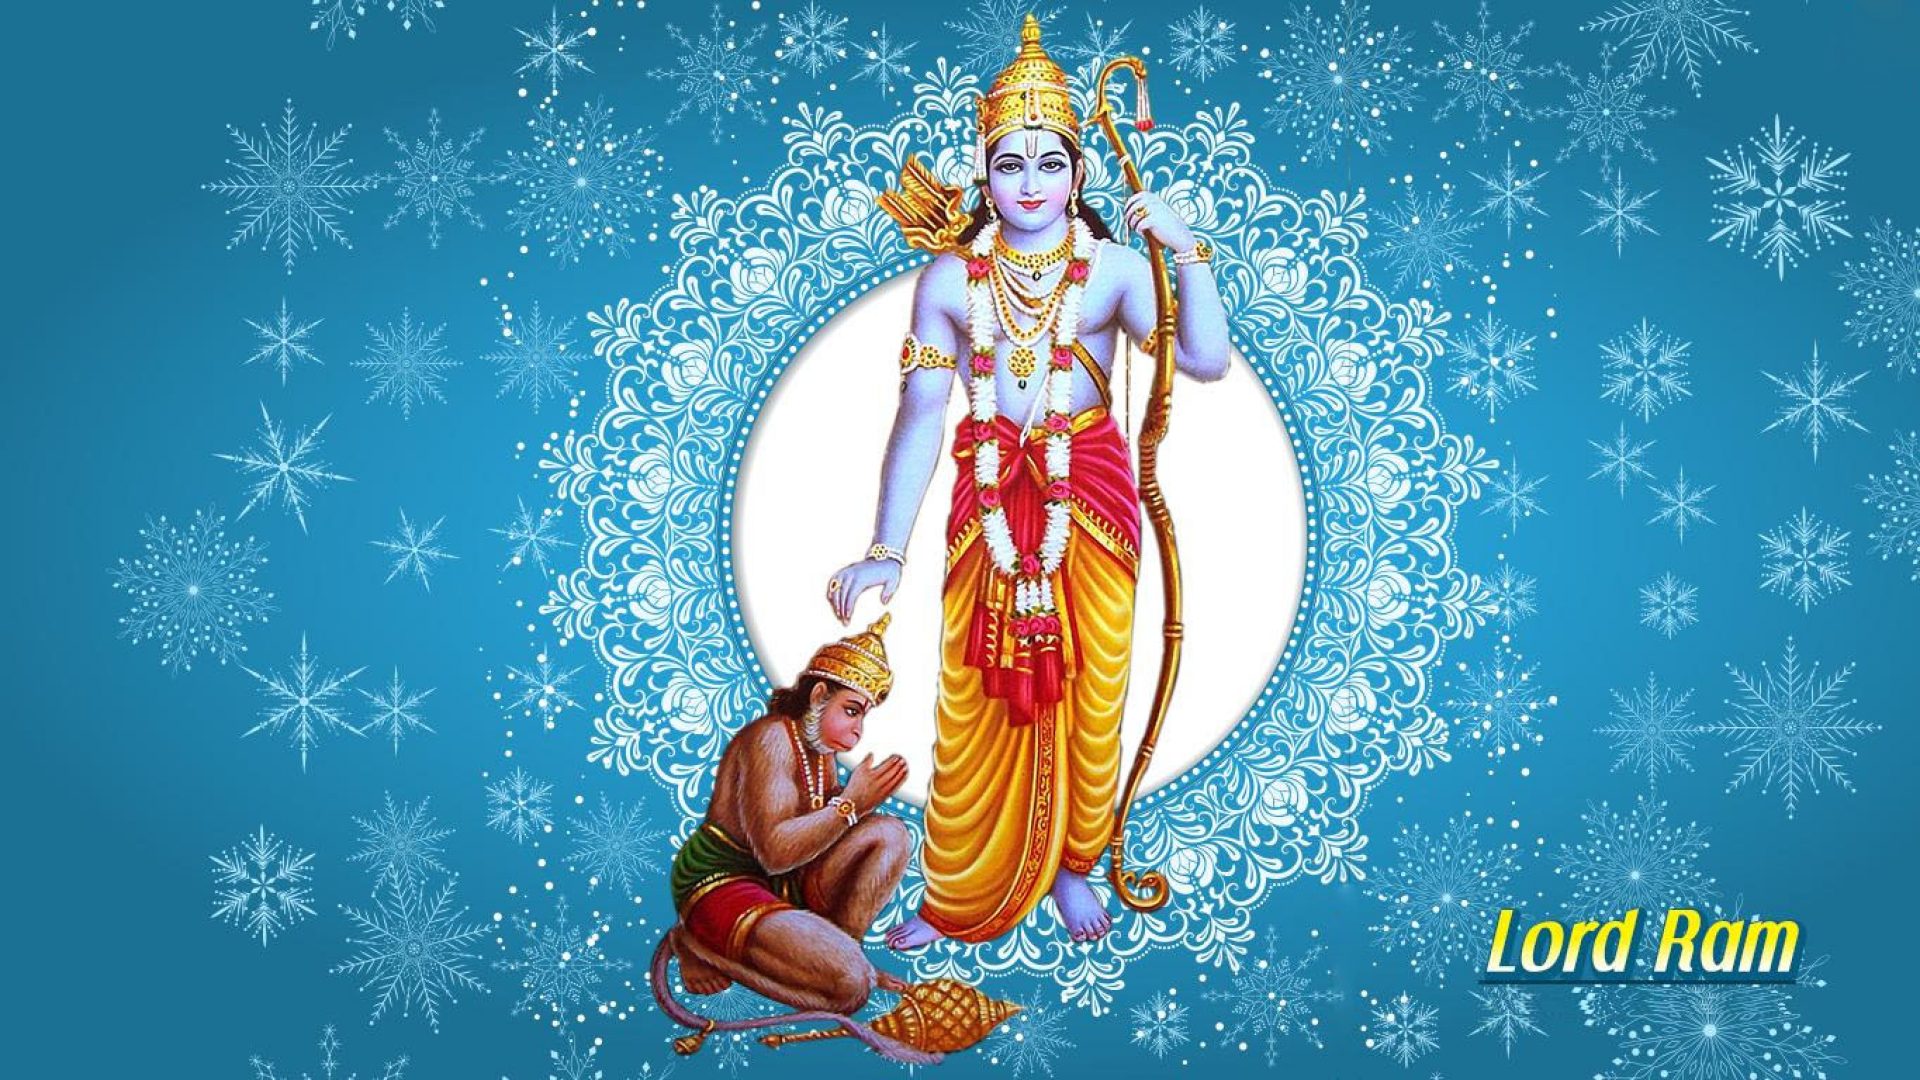 lord rama hd wallpapers for mobile,mythology,illustration,fictional character,art